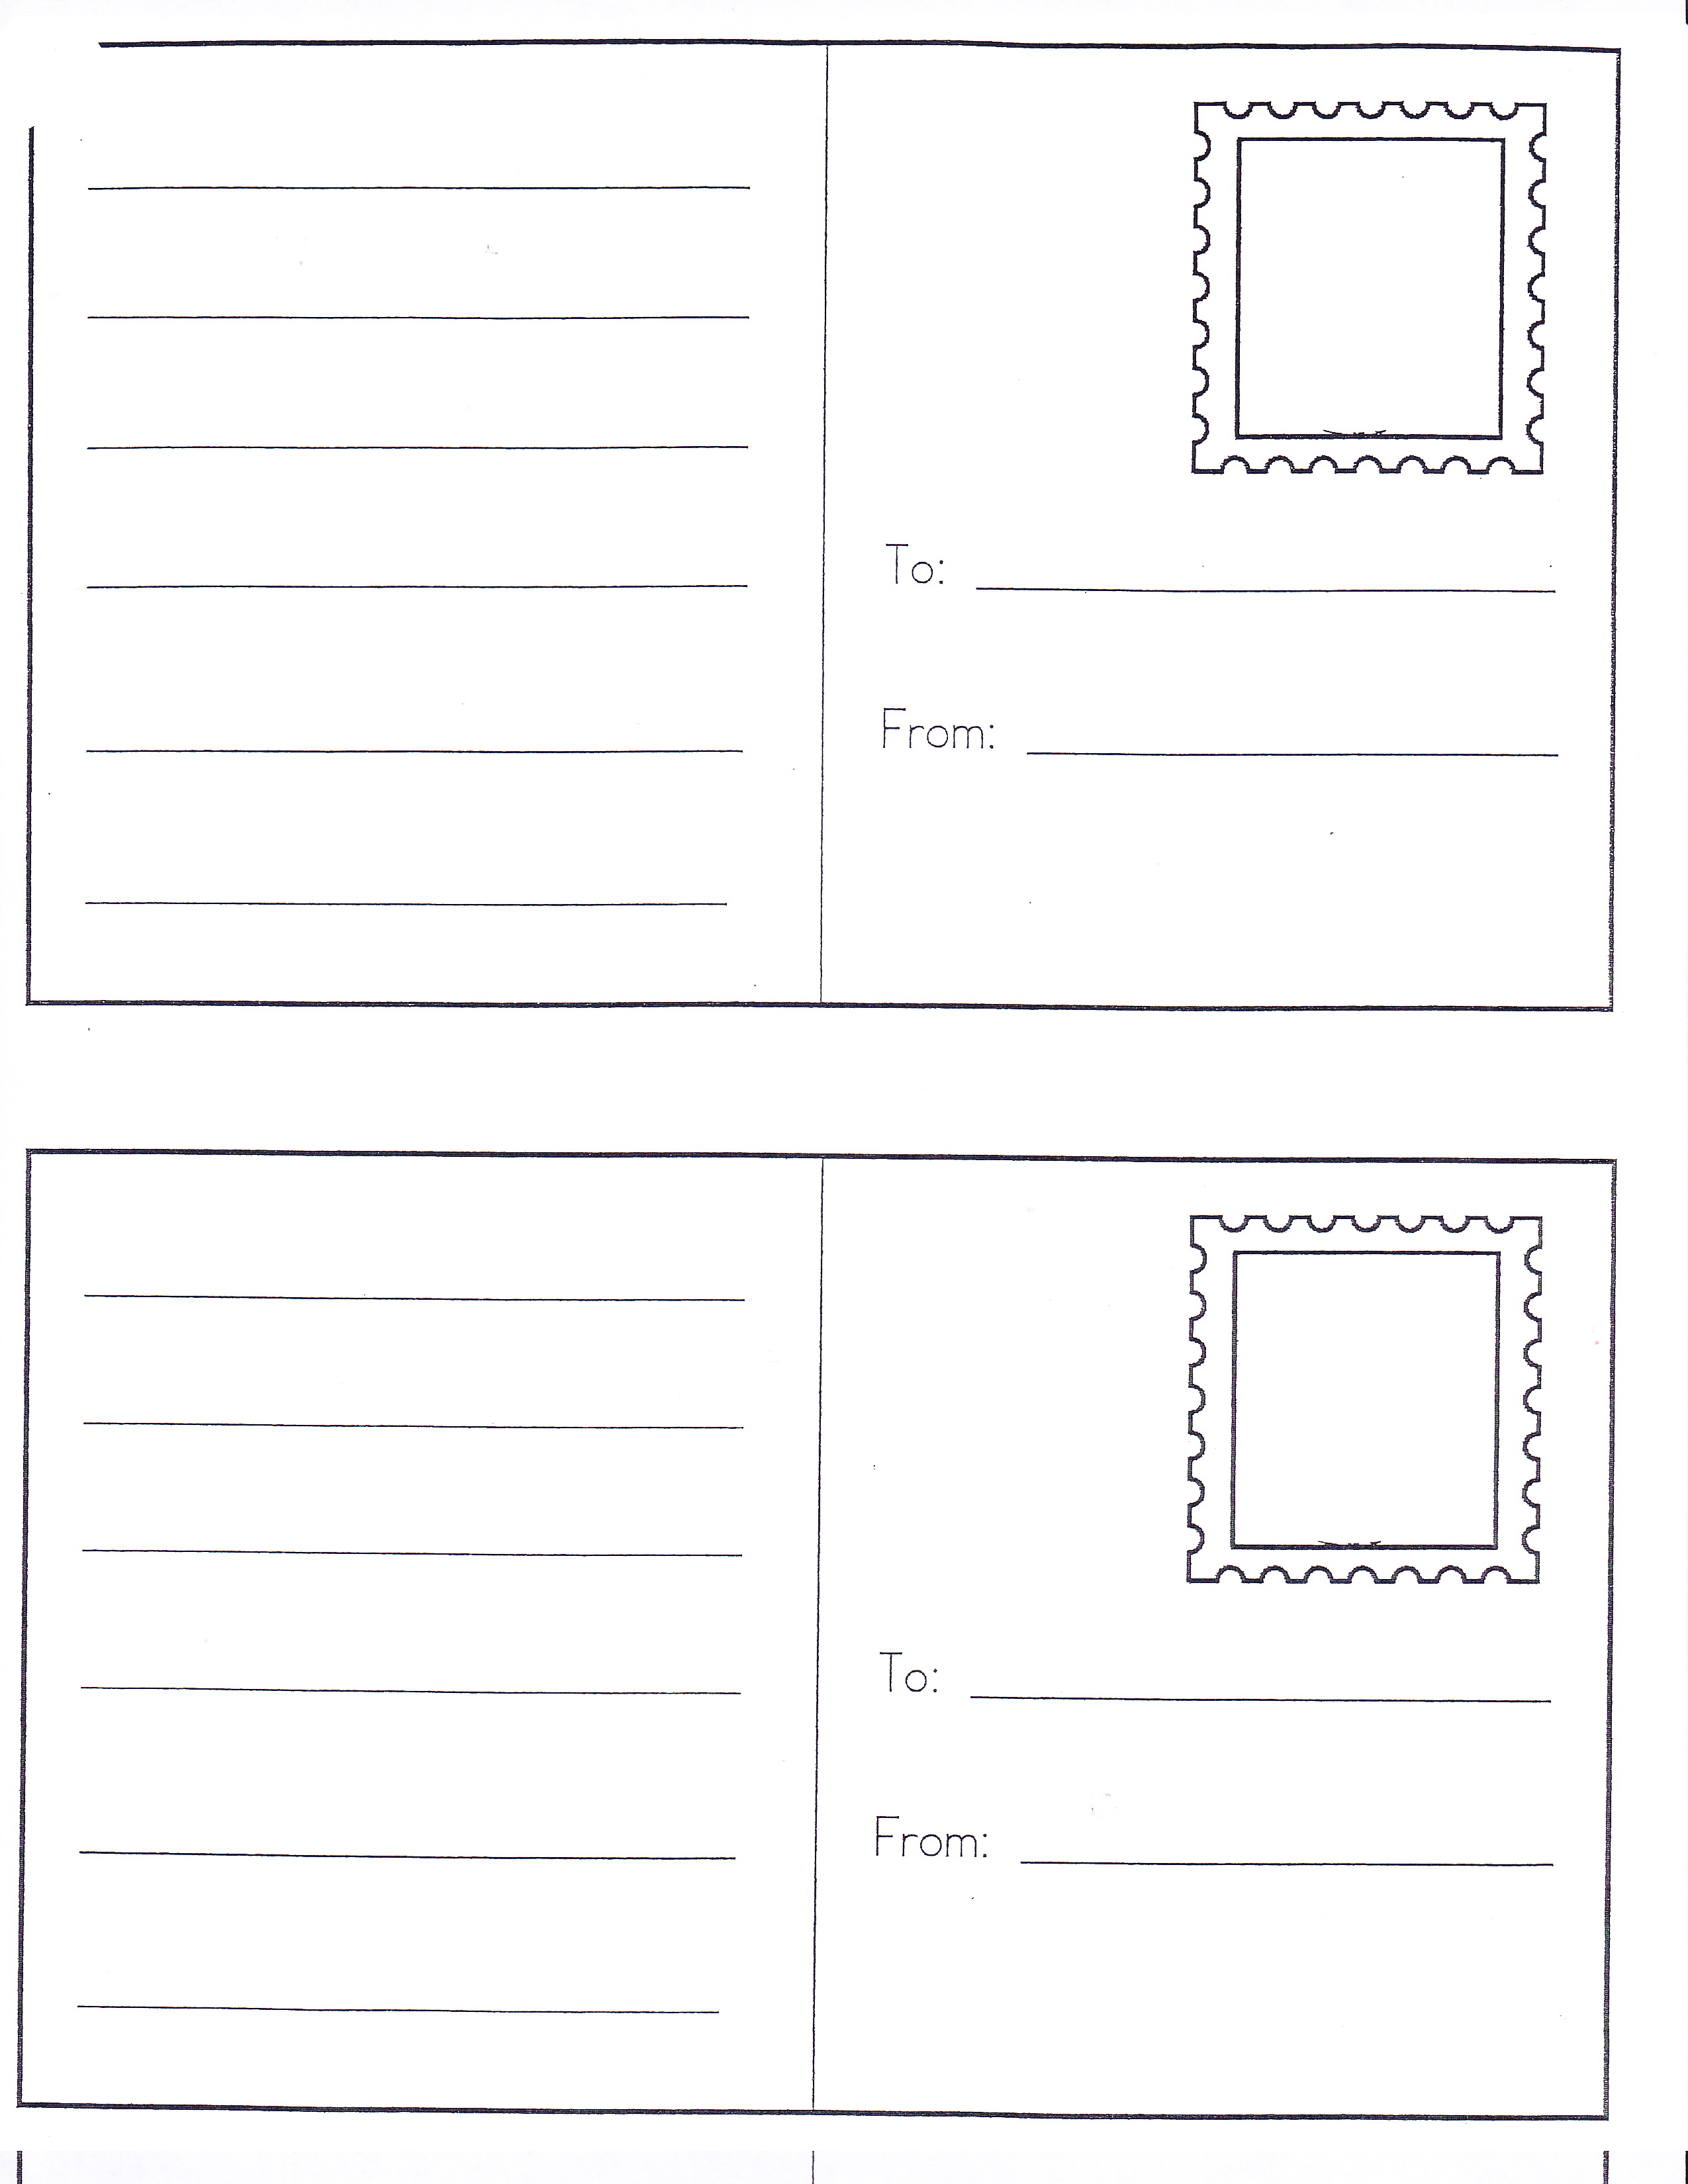 8 Best Images of Preschool Post Office Stamps Printables Postage